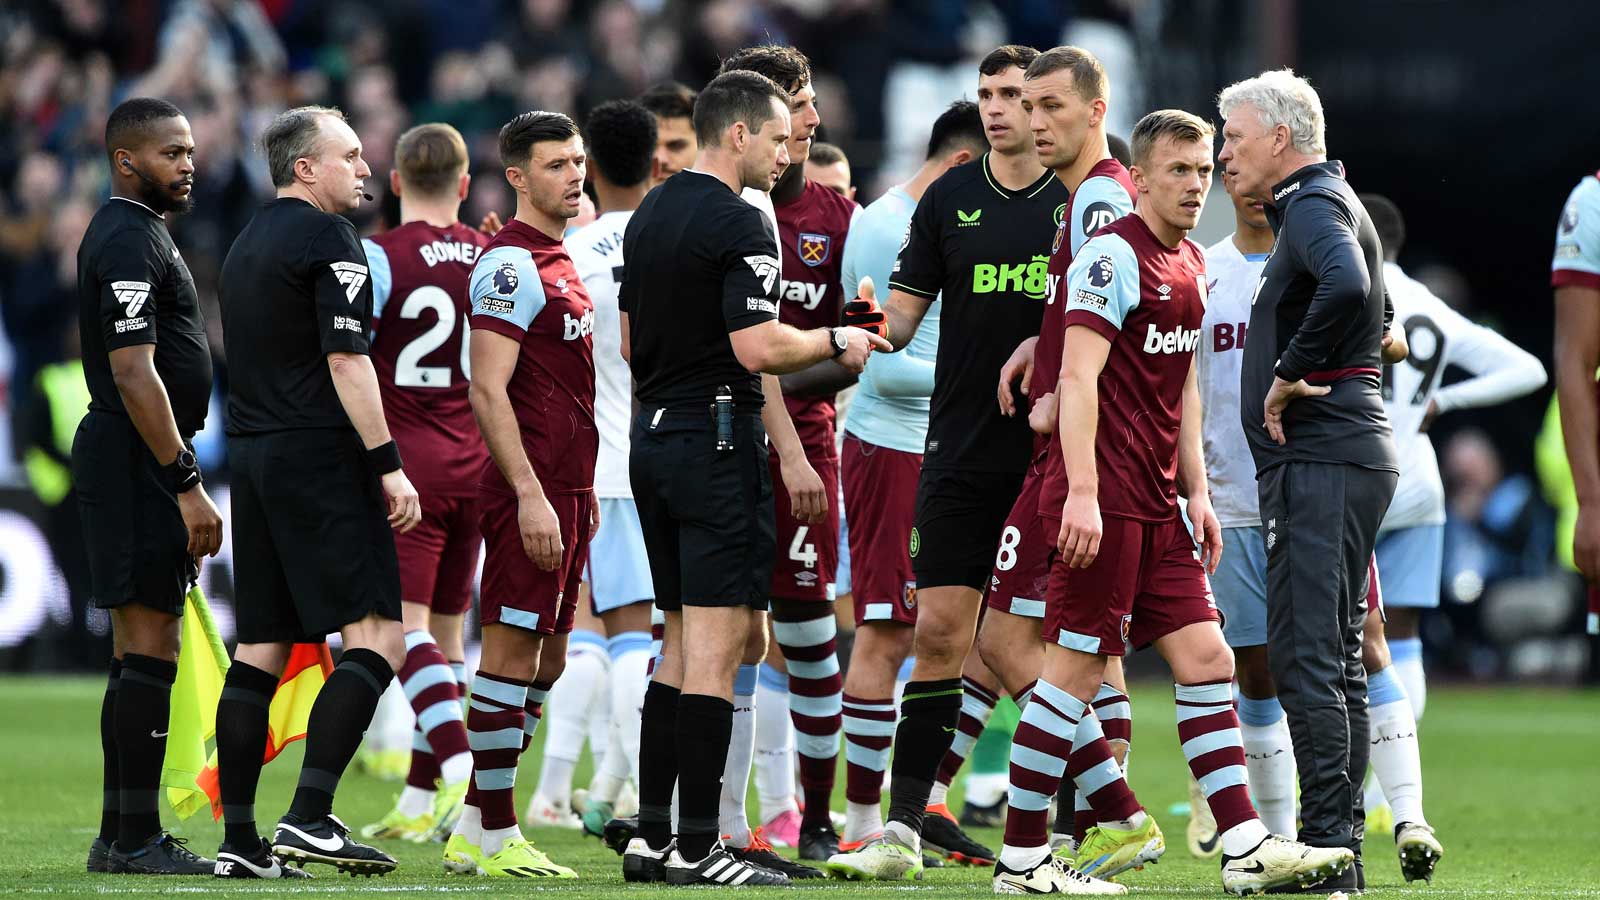 David Moyes speaks with referee Jarred Gillett after the Hammers had a late goal disallowed against Aston Villa